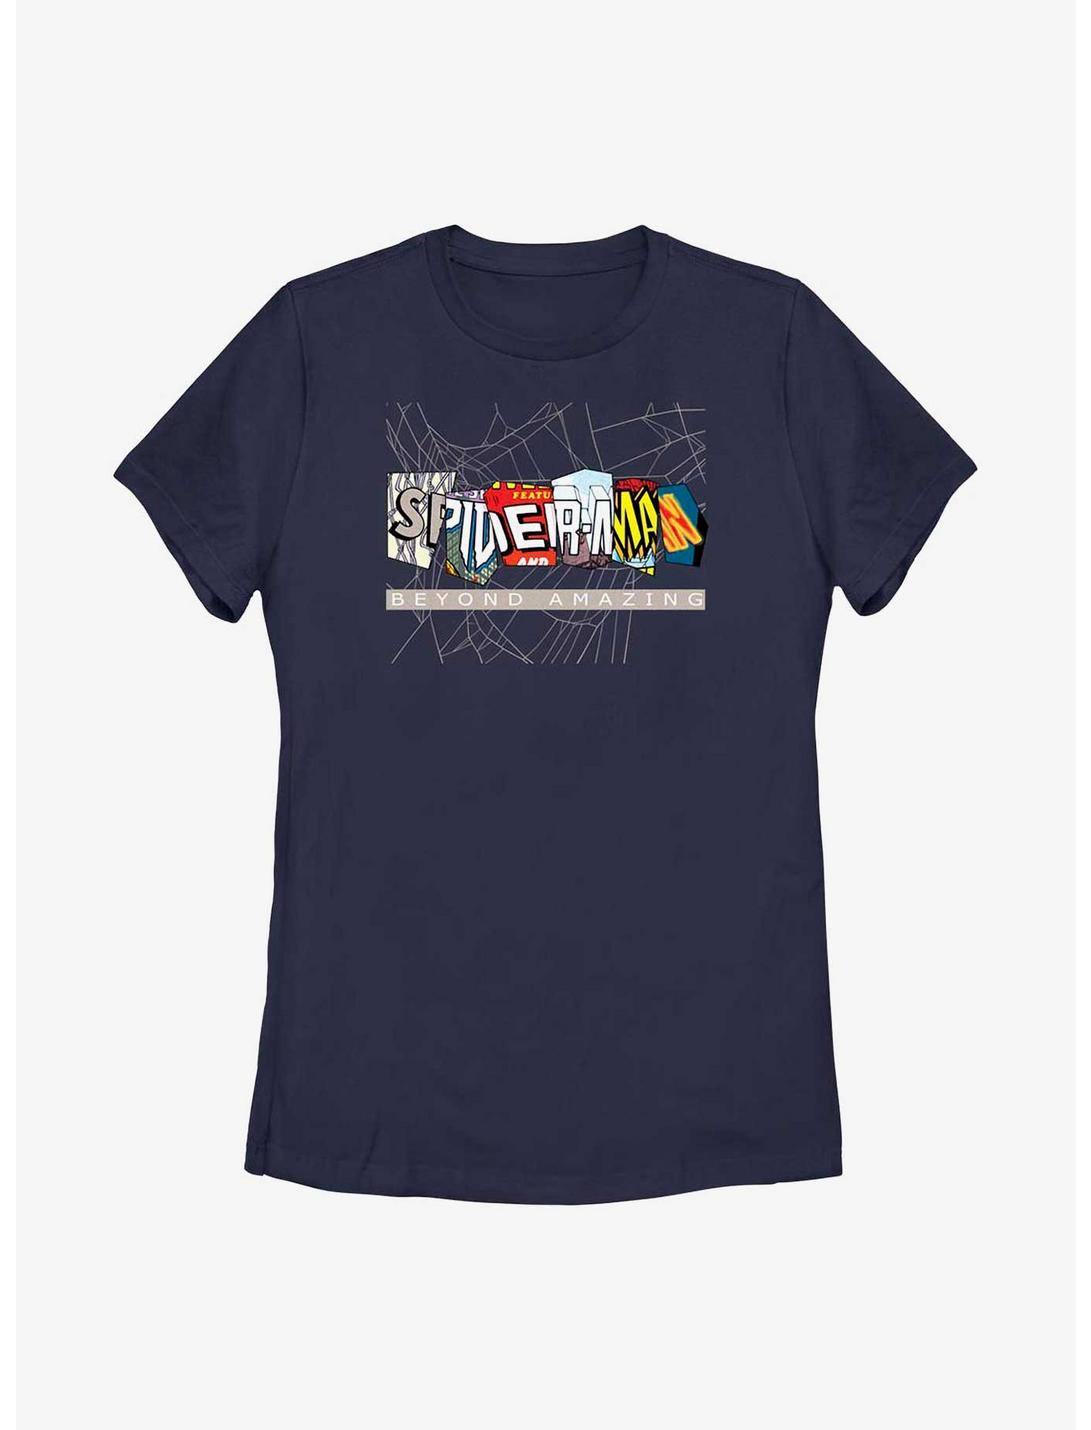 Marvel Spider-Man Beyond Amazing Comic Clippings Logo Womens T-Shirt, NAVY, hi-res